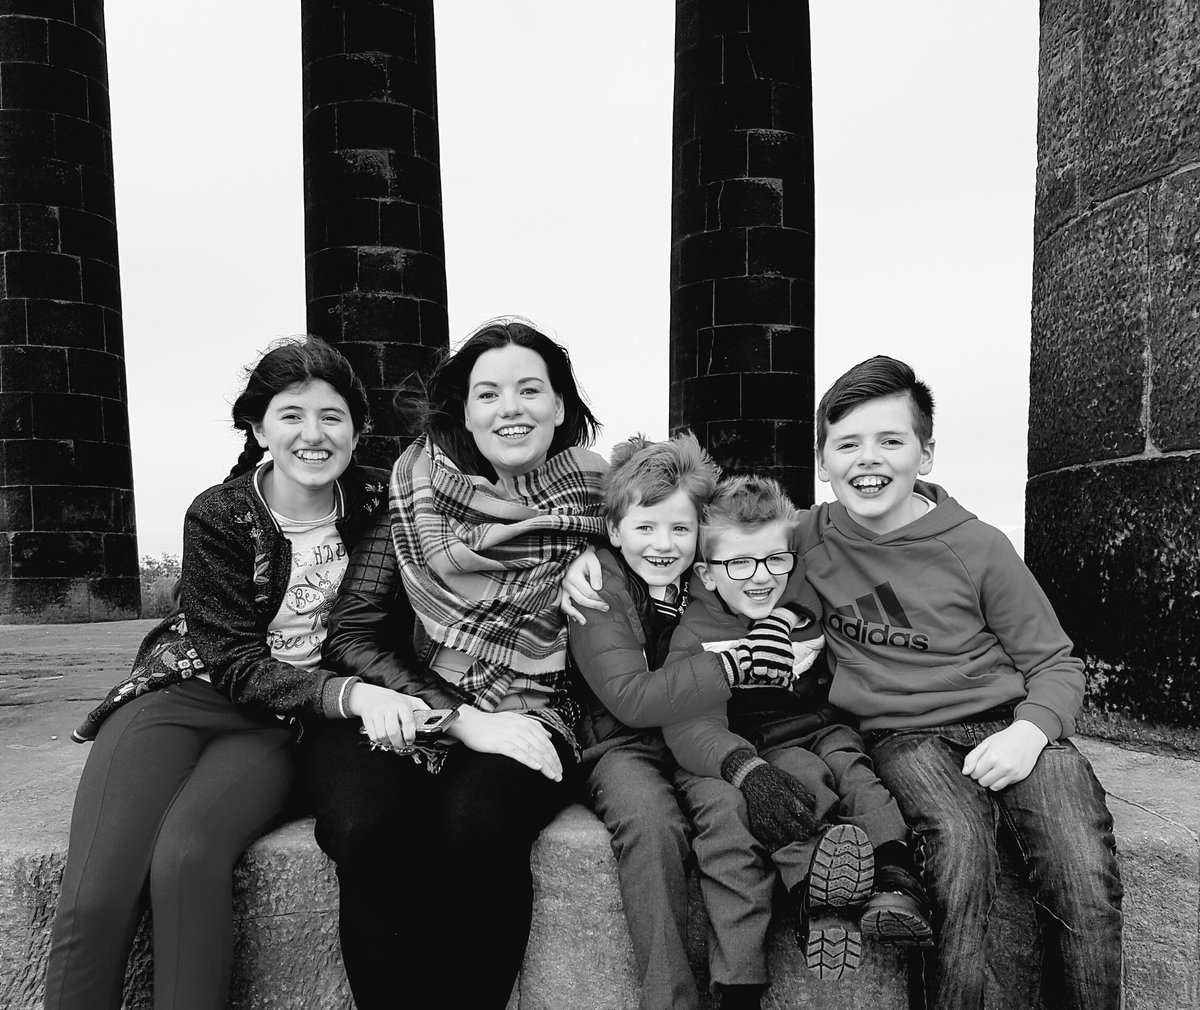 Everybody say cheese! 😂😂
Even though this picture isn't perfect I love it even more. #family photos #familygoals #goodtimes #perfectinmyeyes #lovemyfamily #ukfamilyvloggers #ukvloggers #familychannel #instafamily #november2019